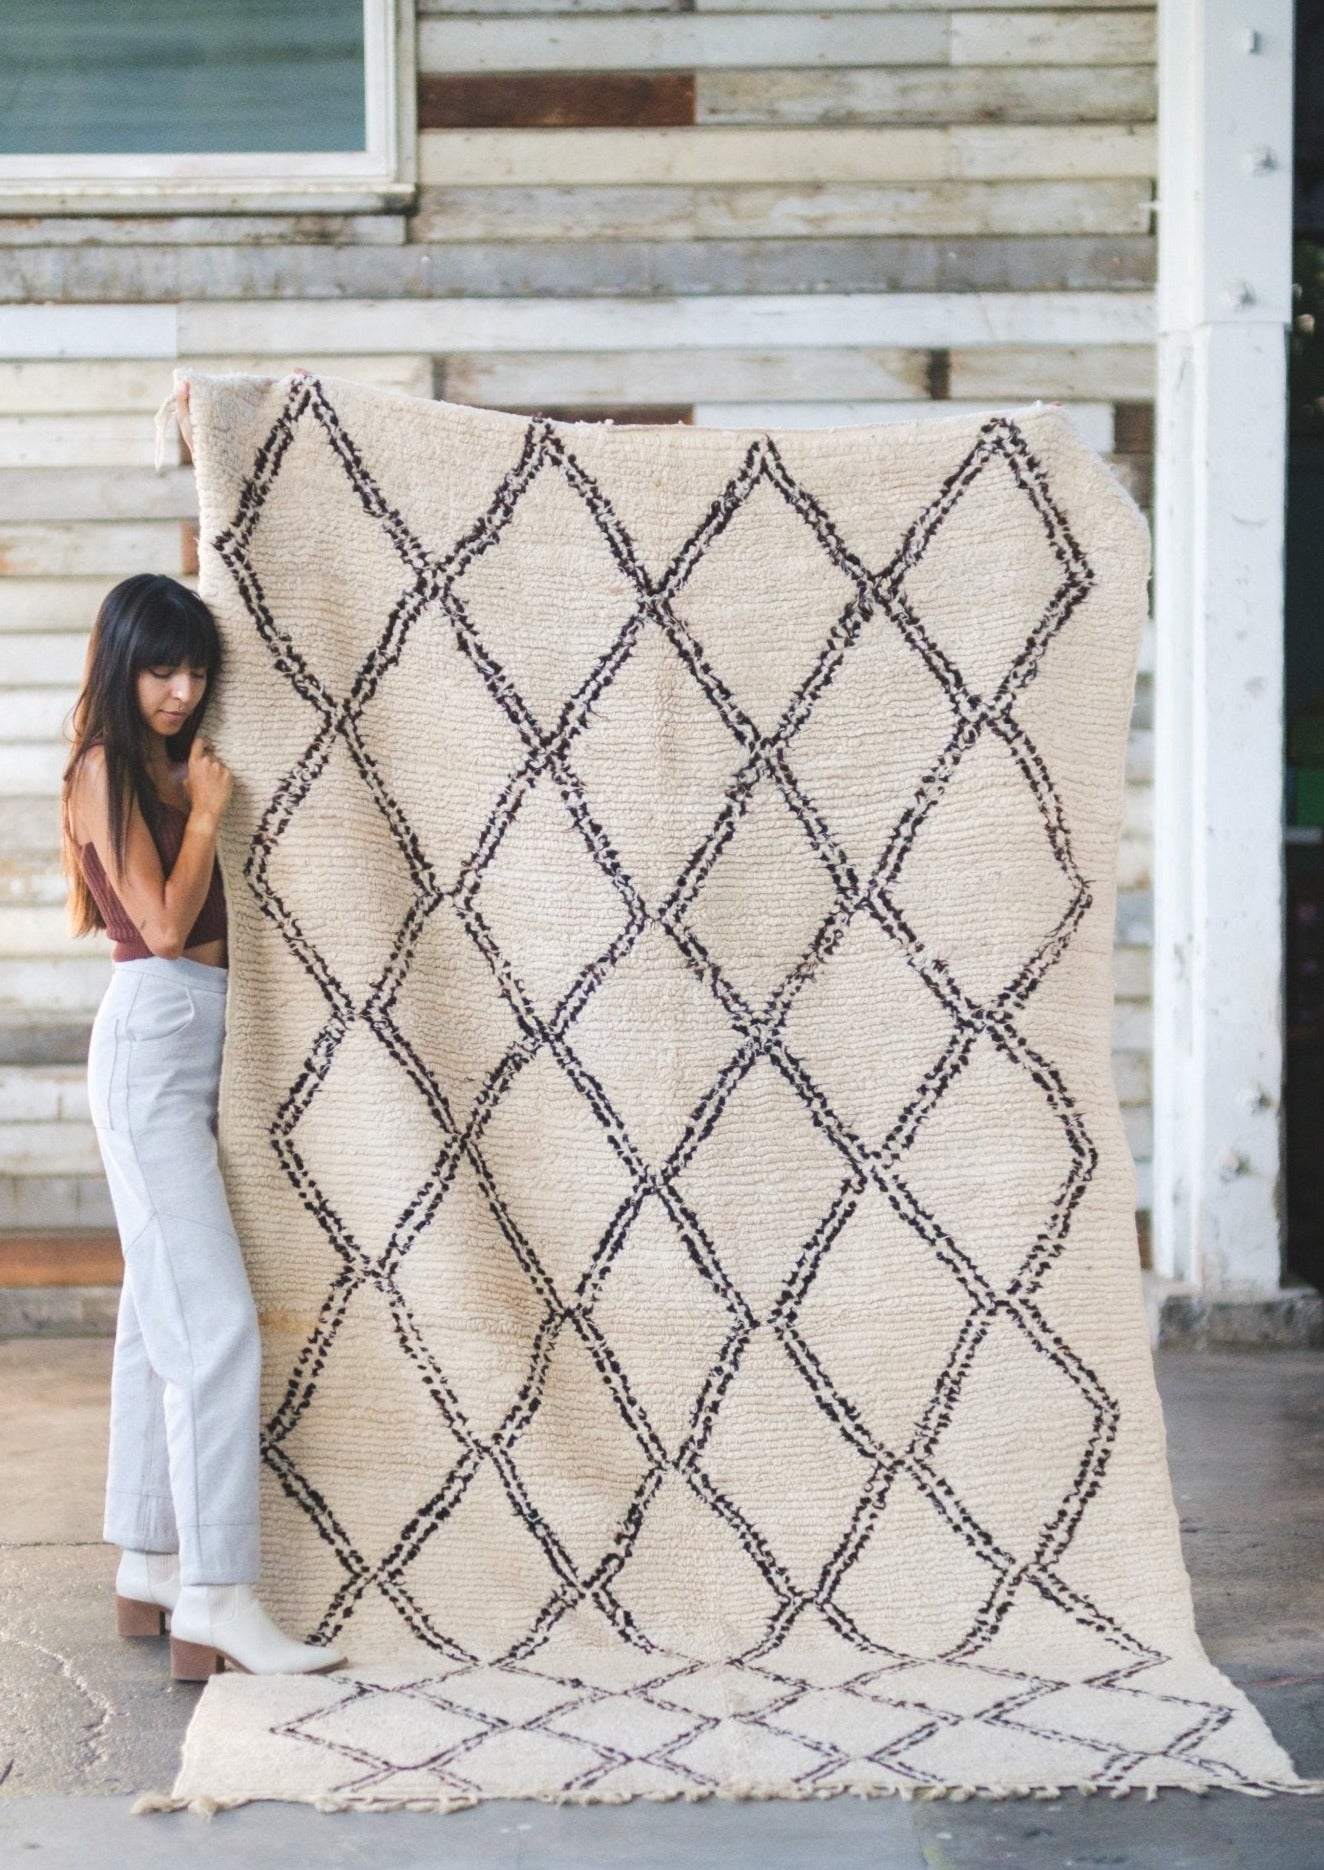 girl holds classic beni ourain rug close, lovingly adores it and is cozy soft standing in rustic scene